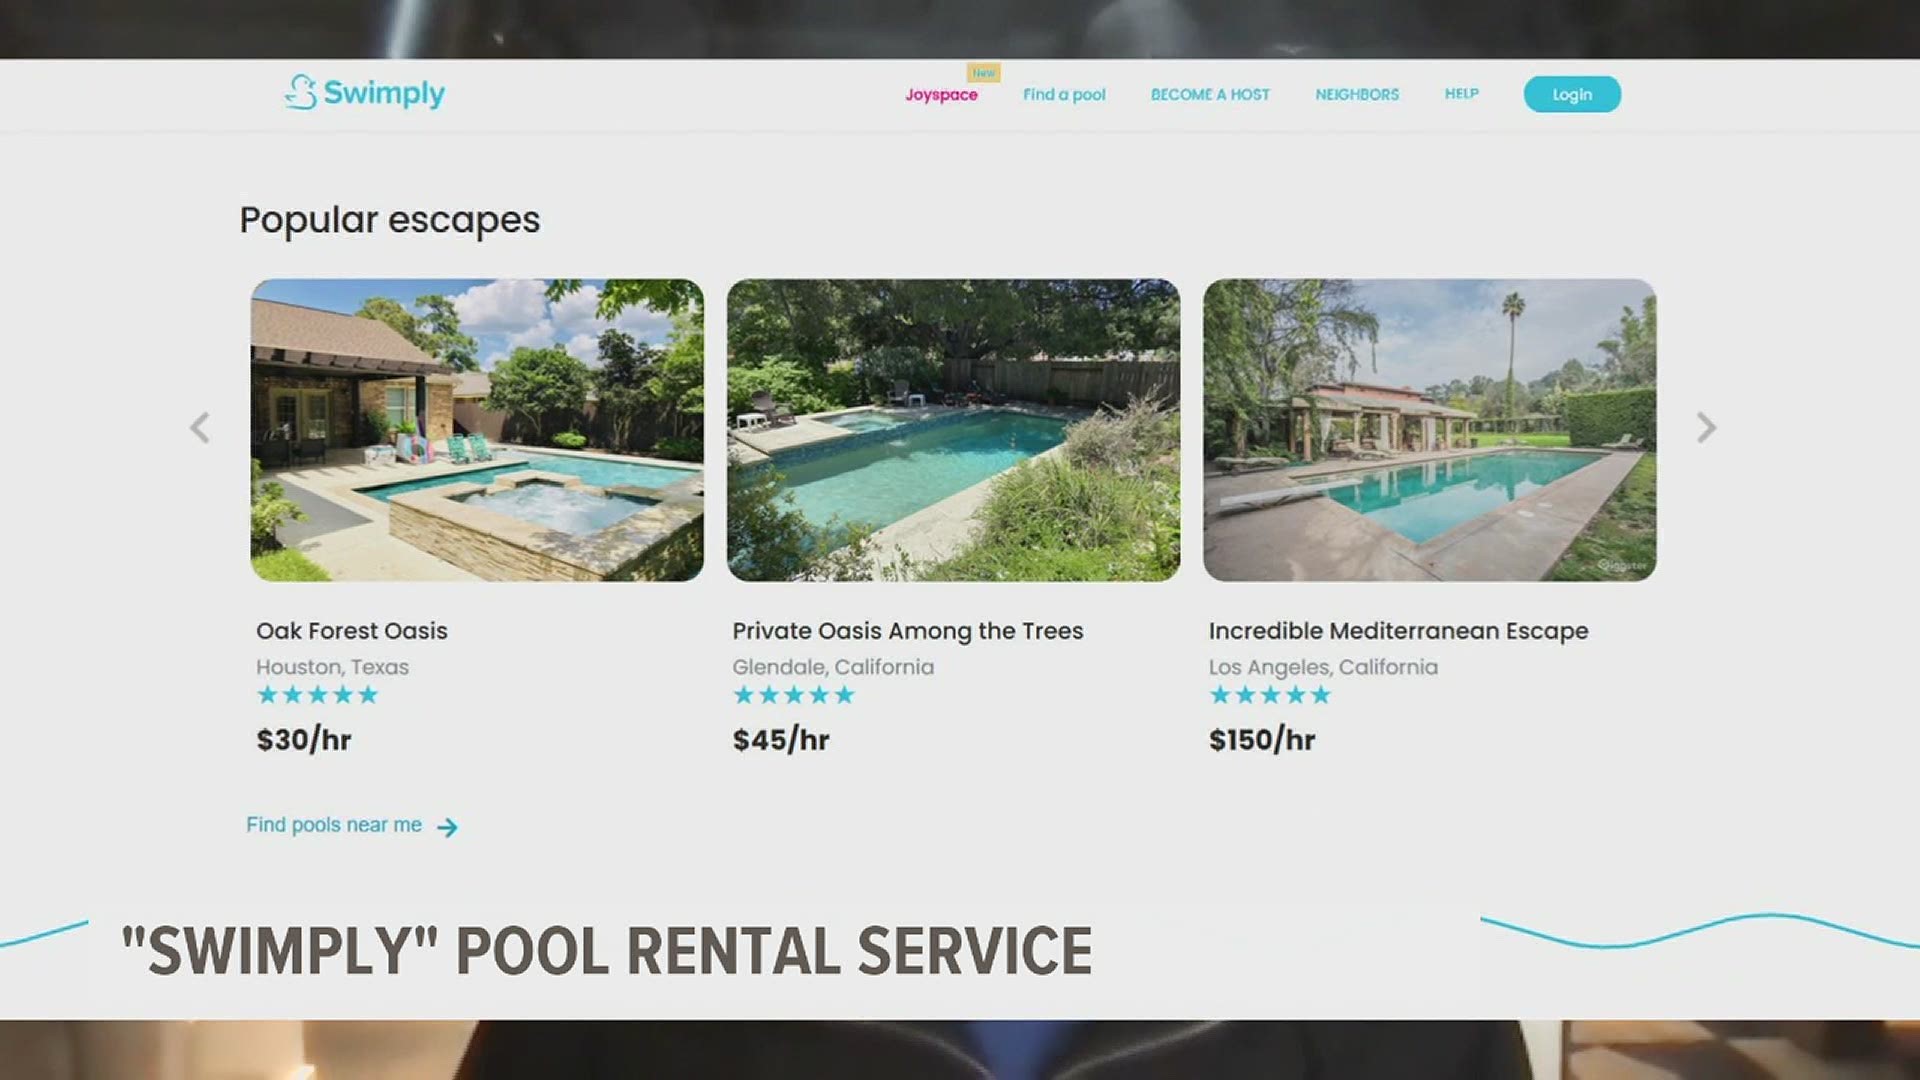 Swimply allows private pool days through online rentals fox43 pic